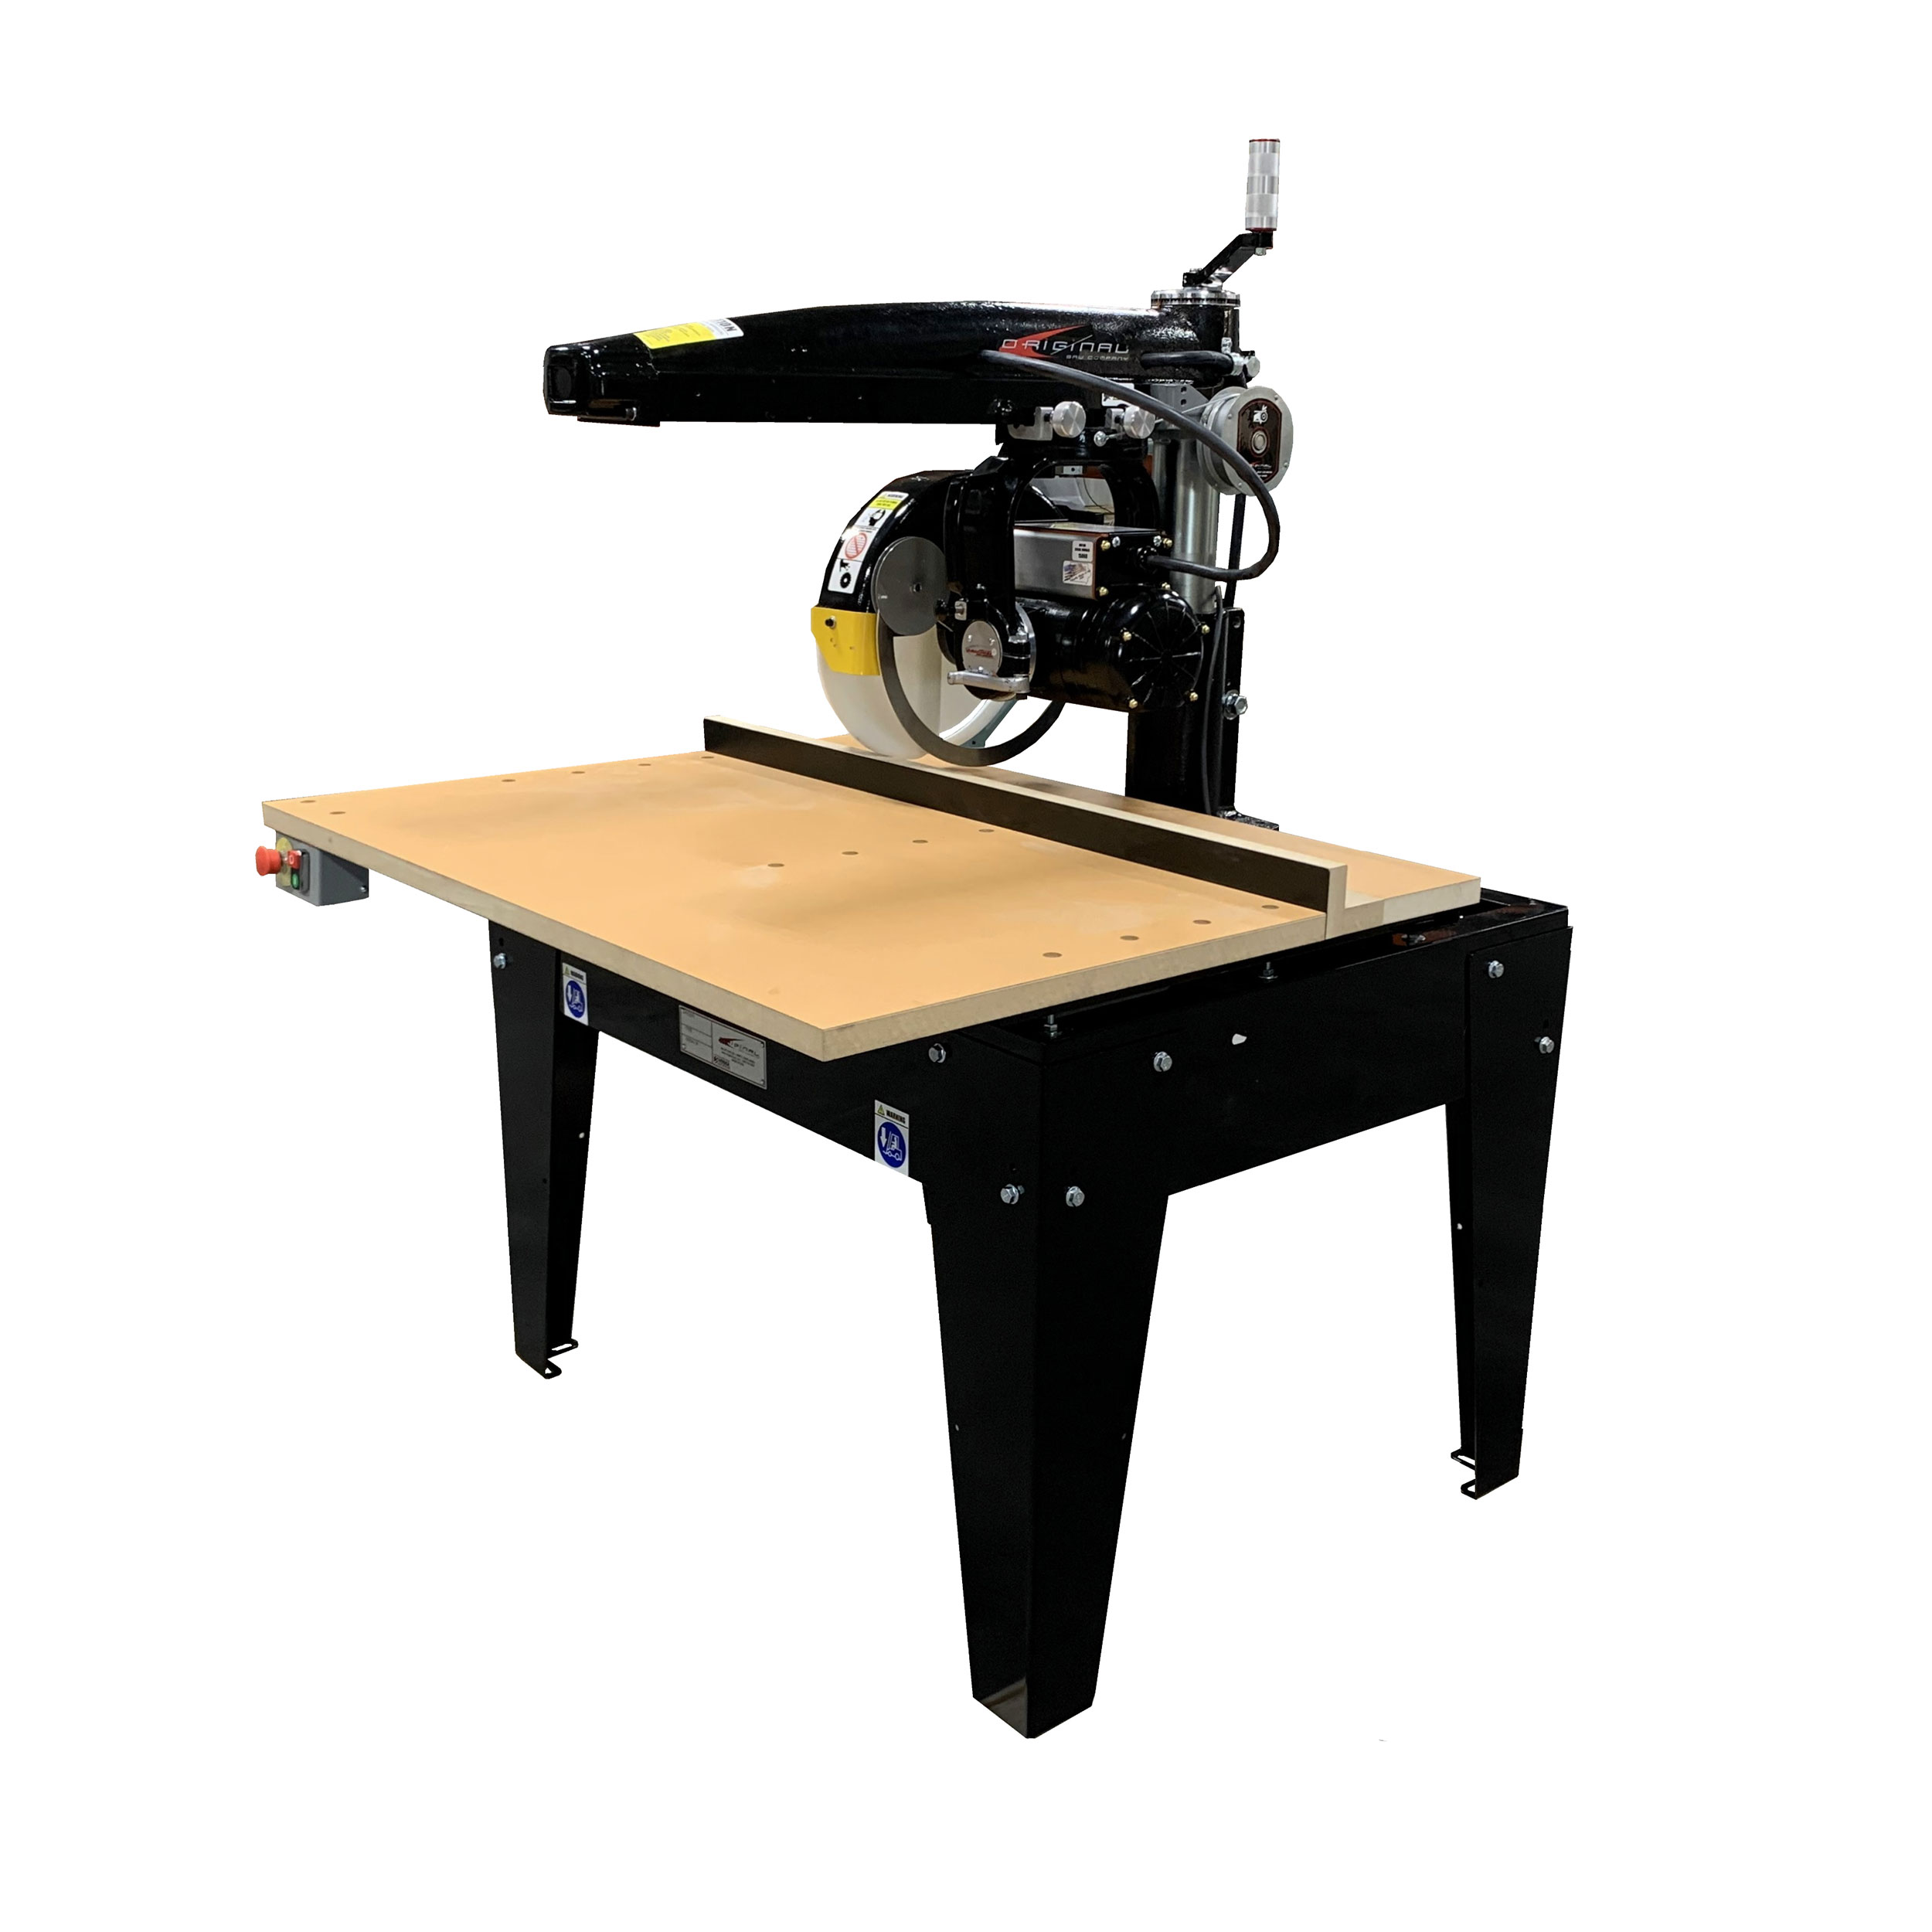 Radial Arm Saw With 14" Blade And 16" Crosscut, 5hp 3 Phase 208/230v